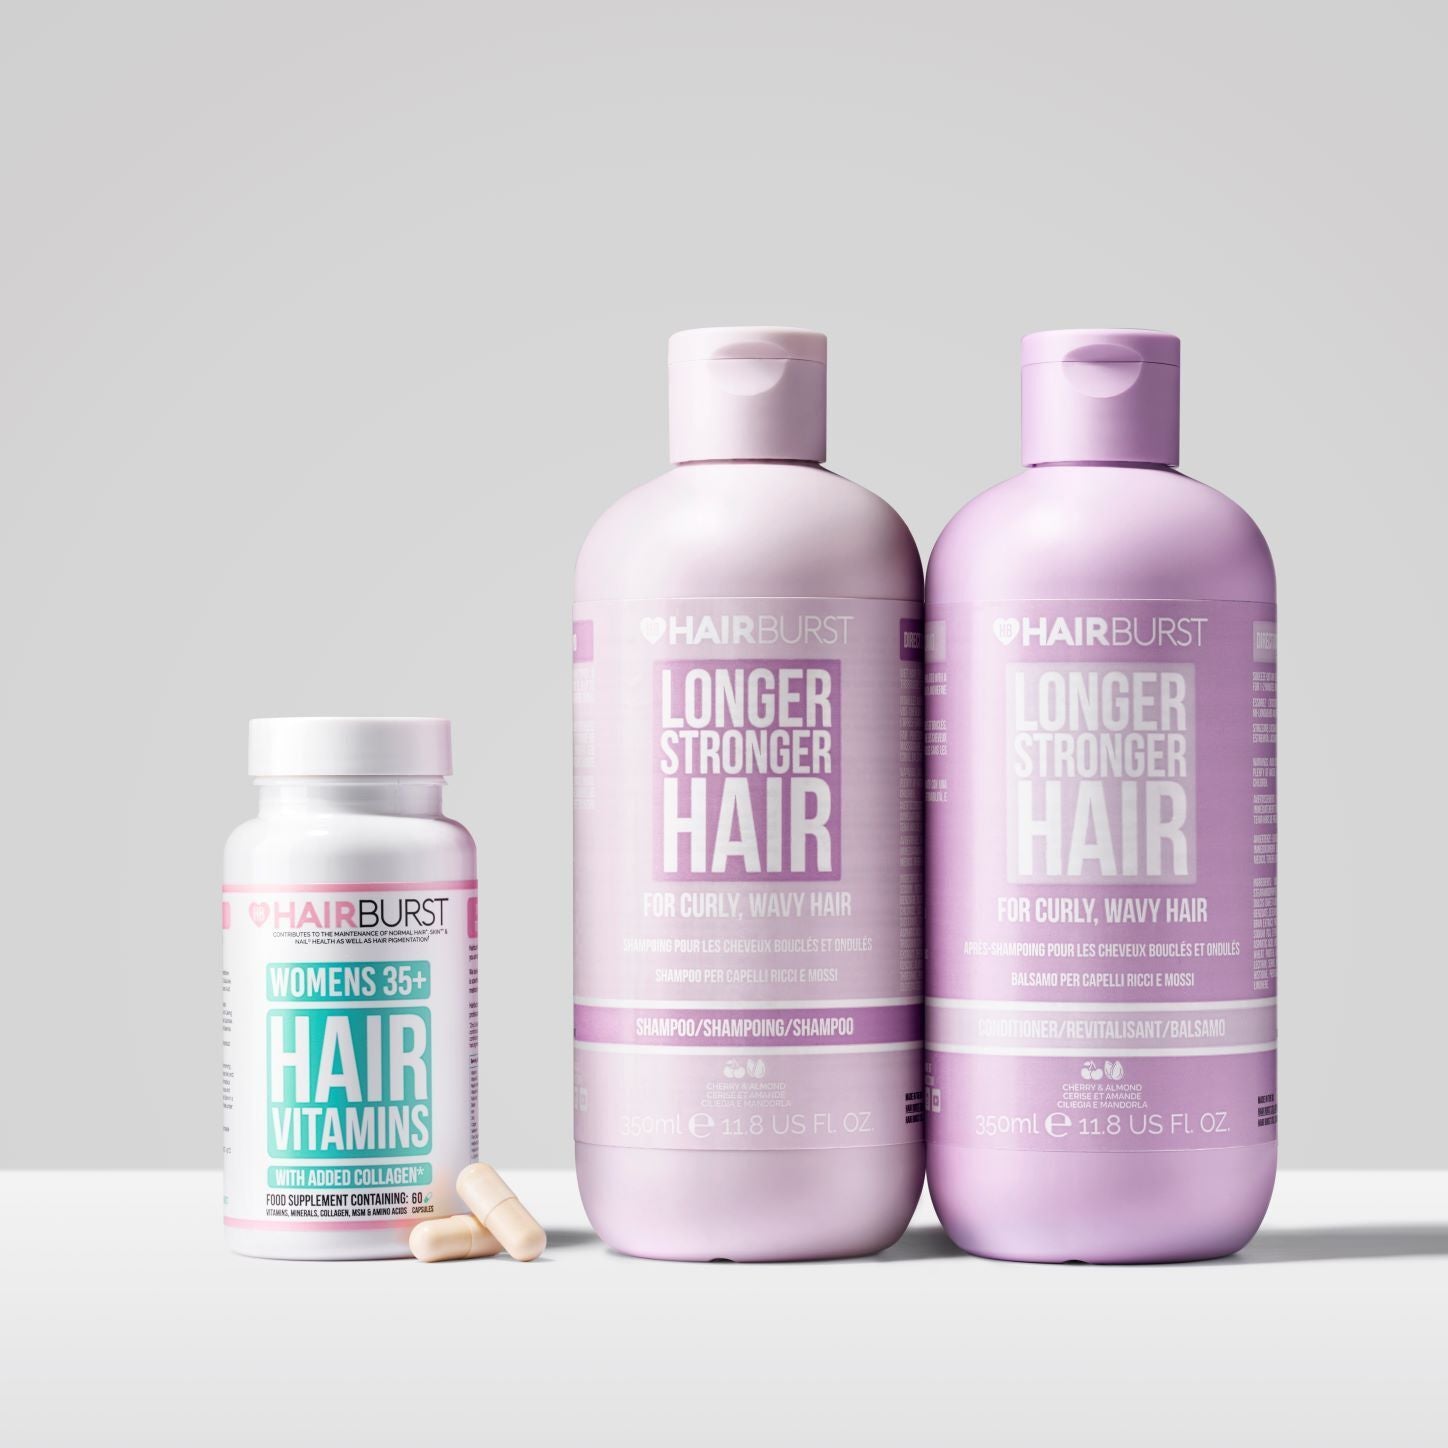 The 35+ Hair Growth Bundle - Added Collagen